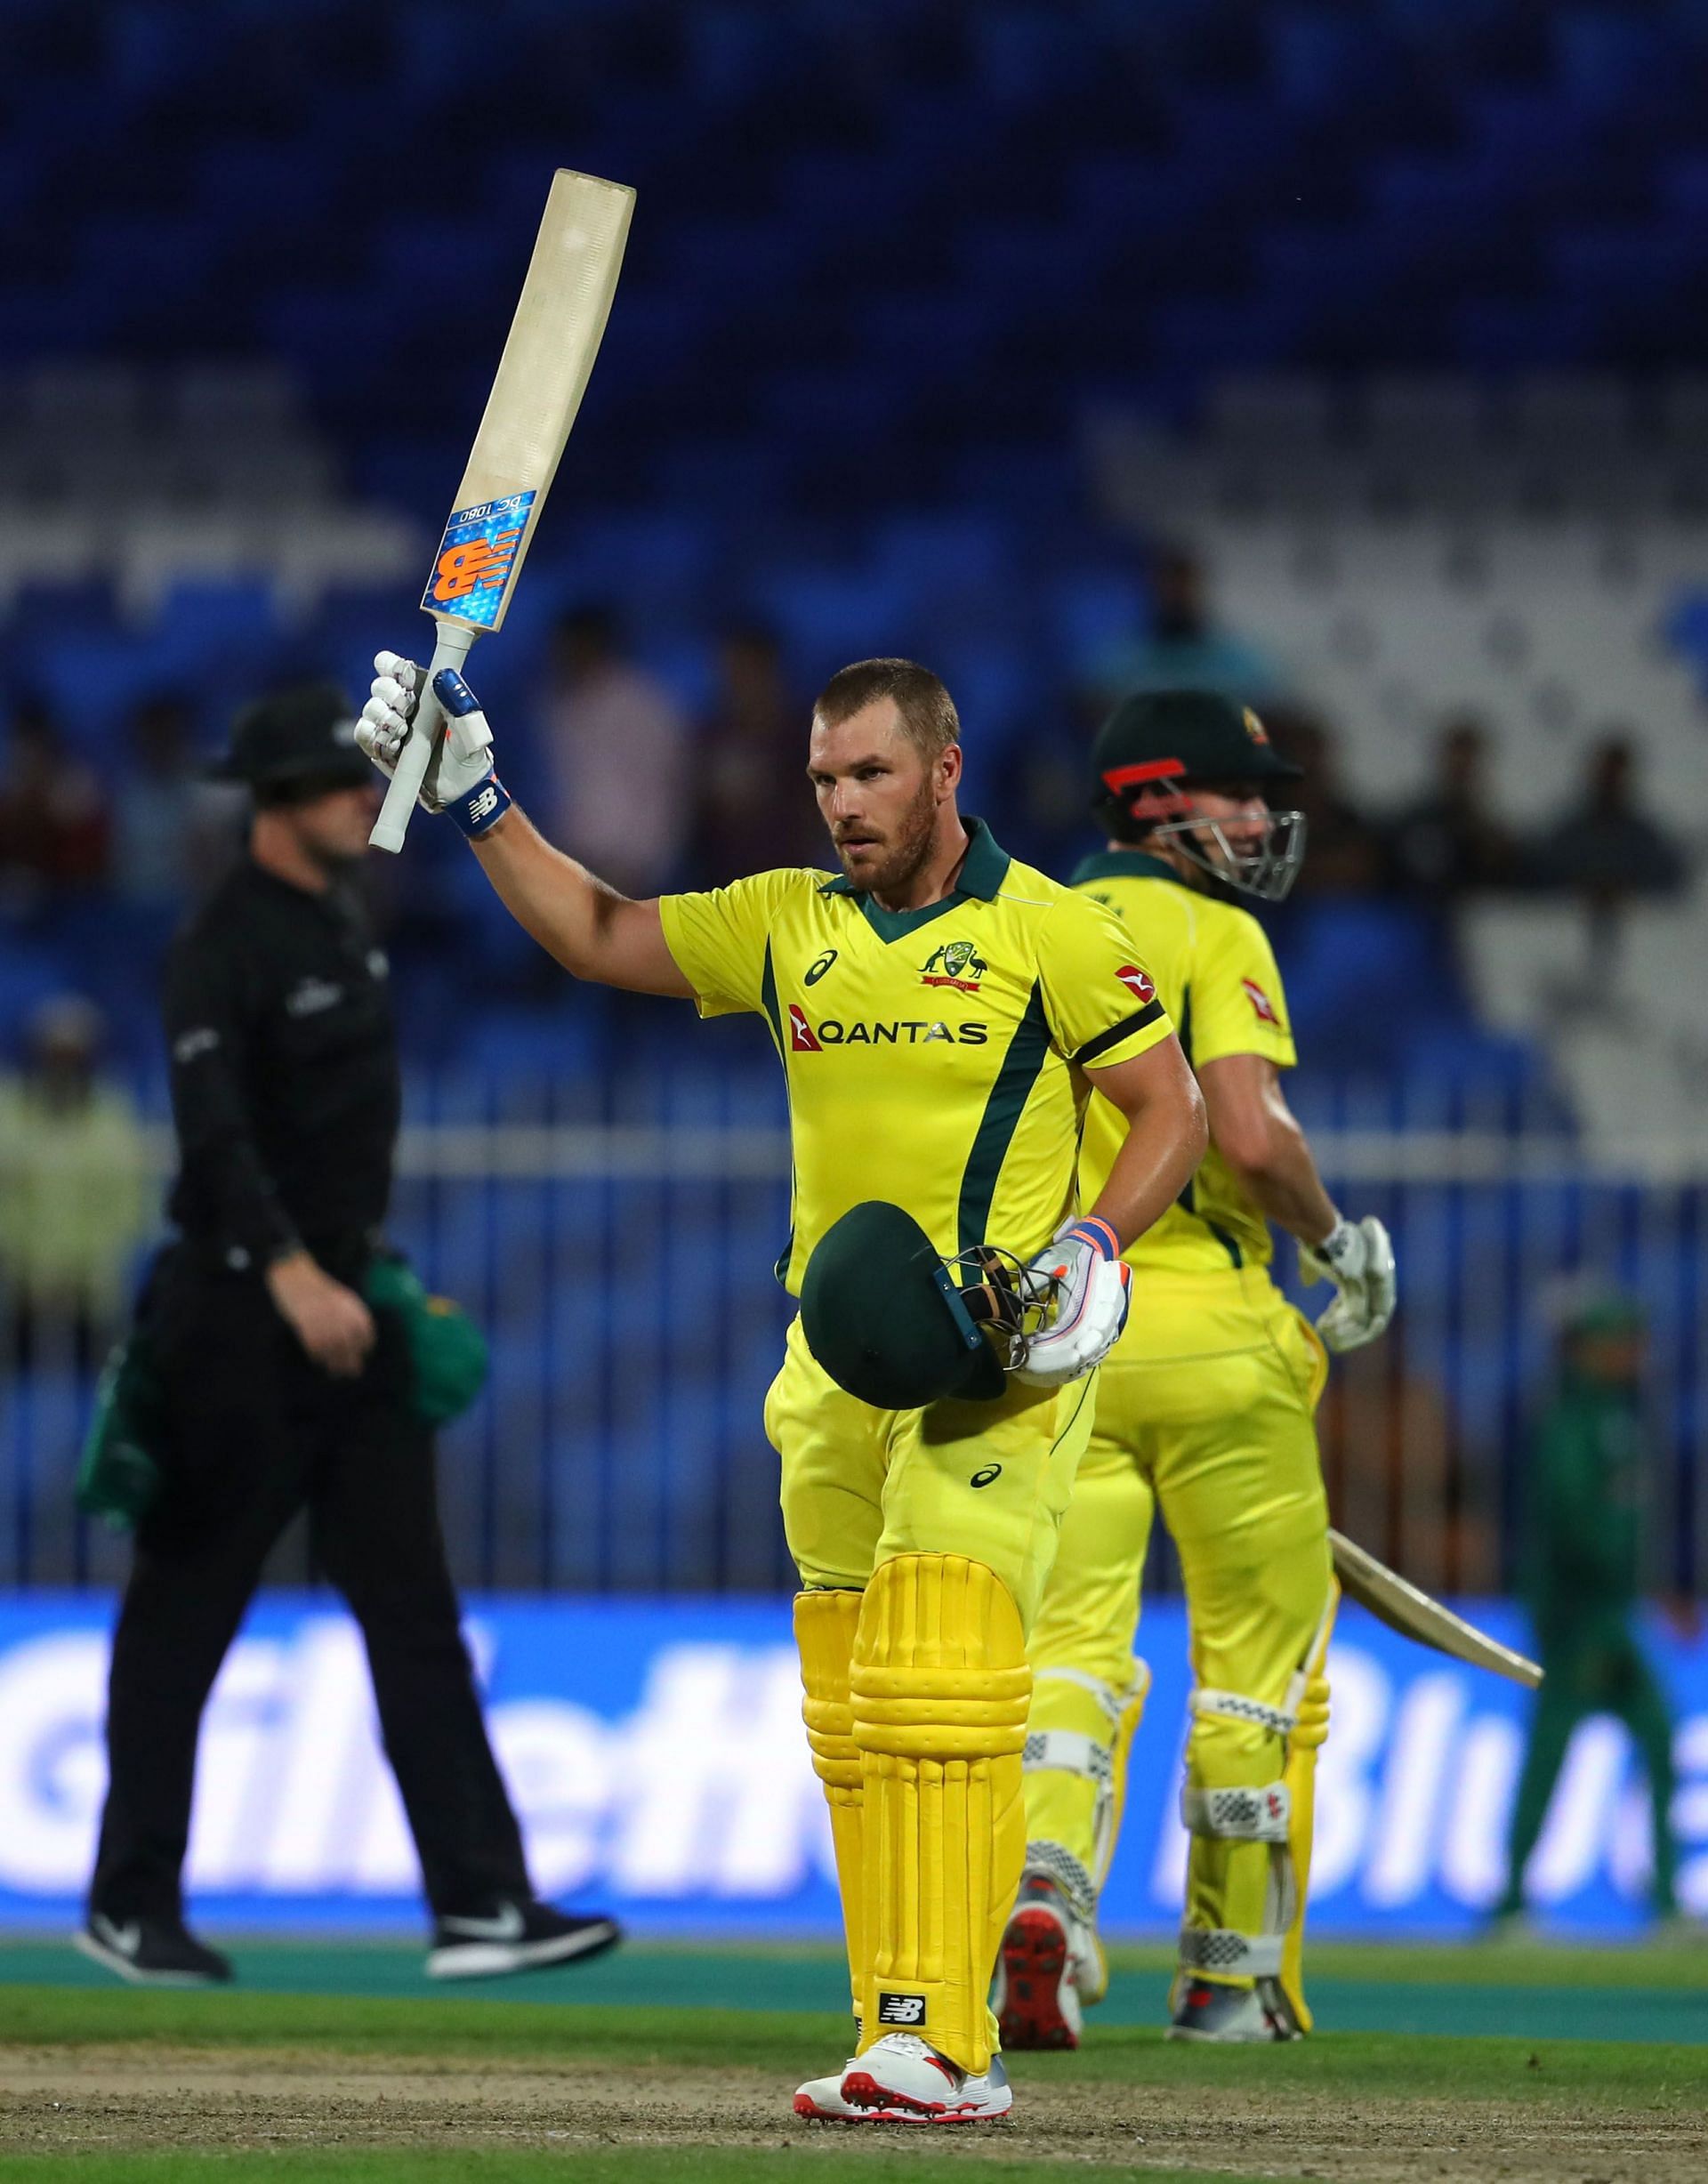 Aaron Finch rose to the occasion during the 2019 ODI series in UAE against Pakistan